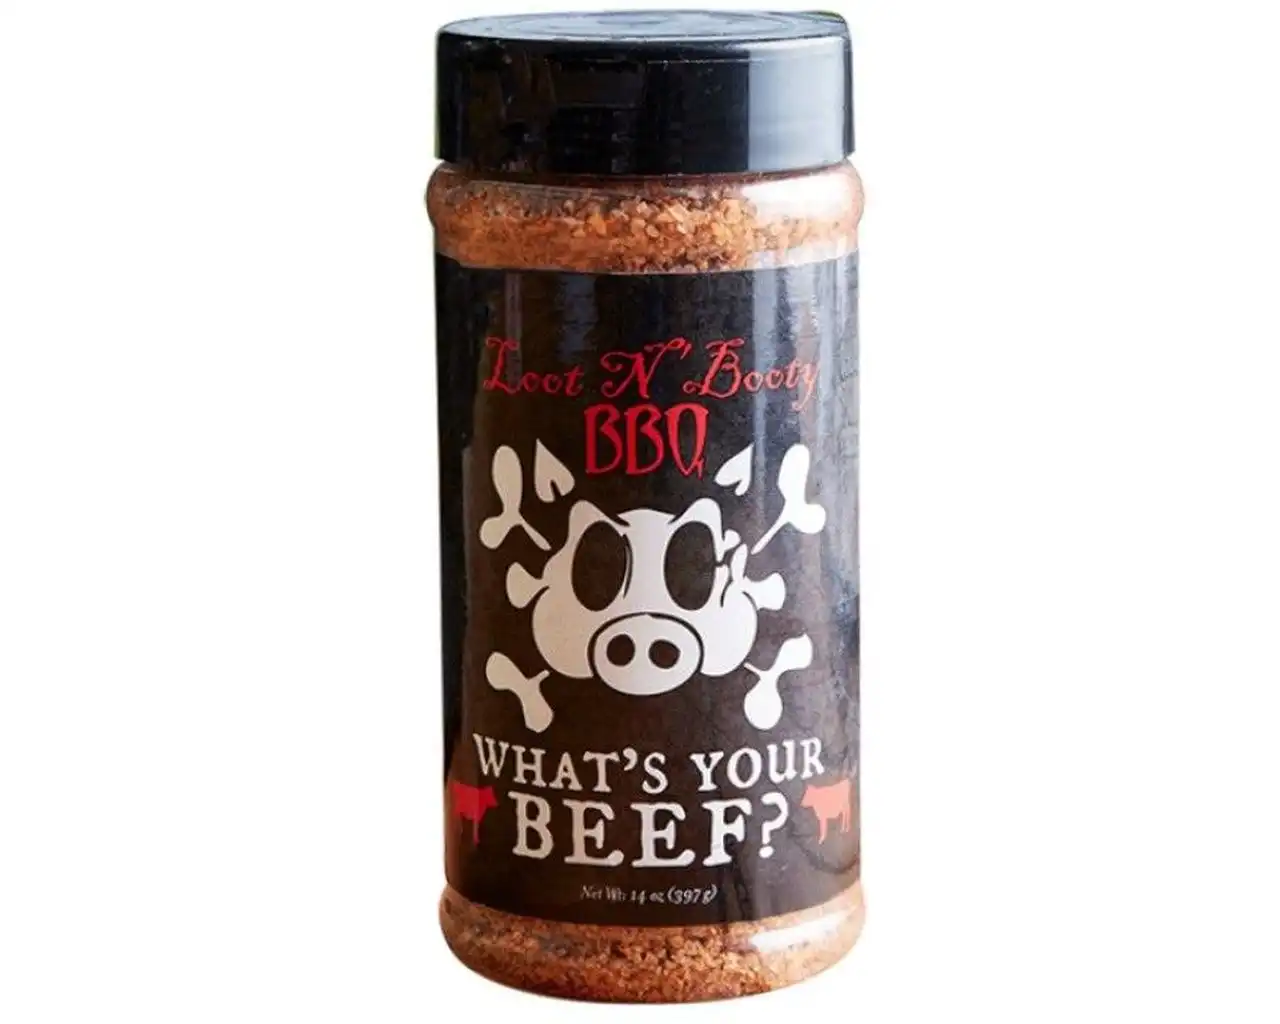 Loot N' Booty What's Your Beef - BBQ Rub